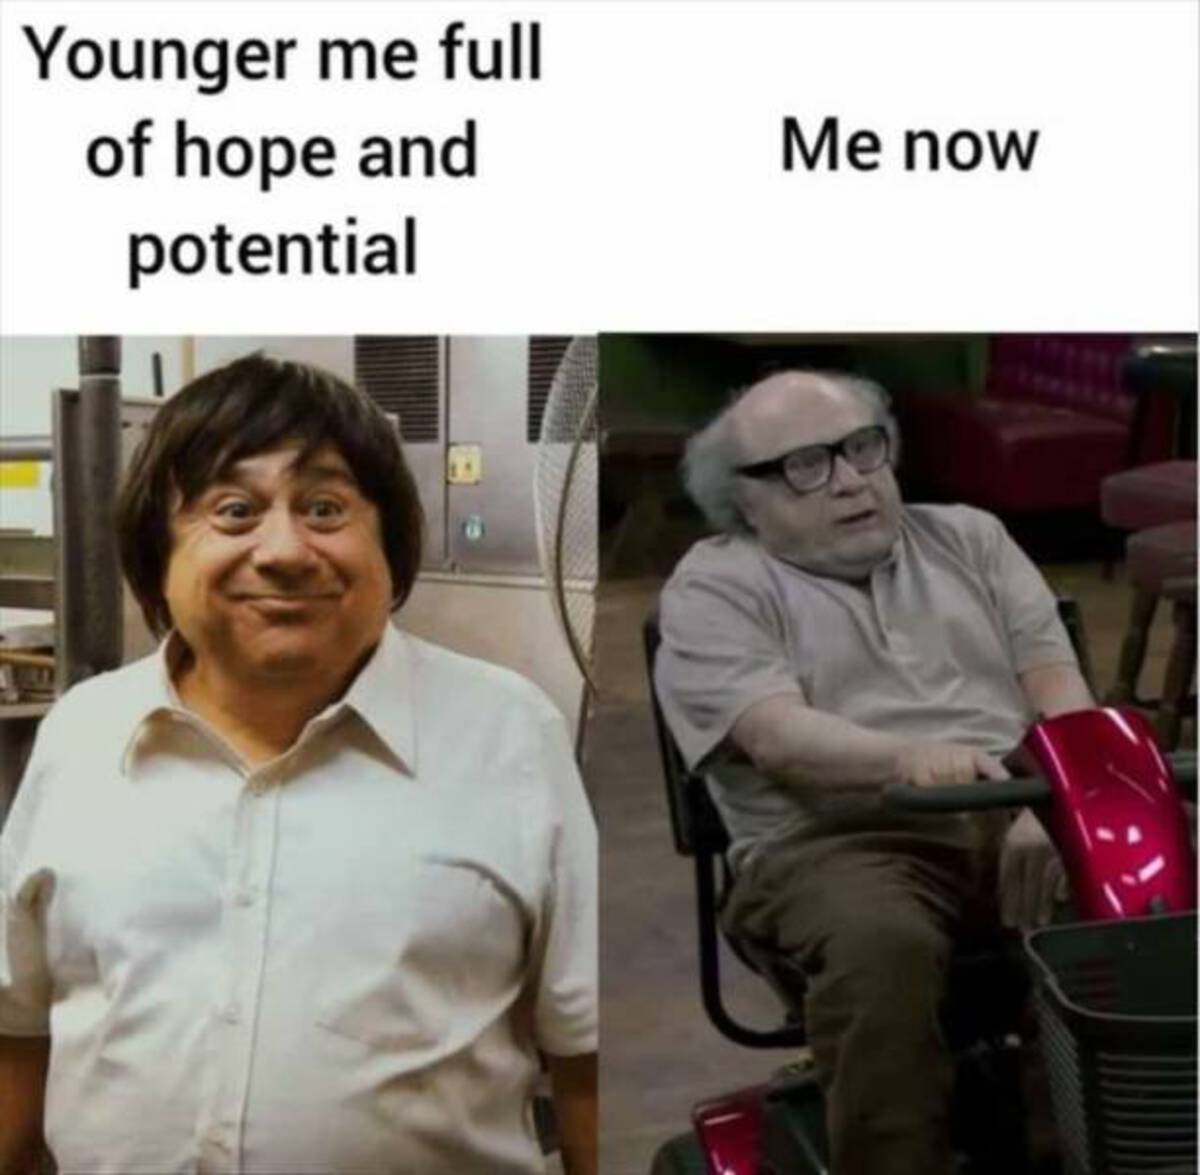 danny devito young - Younger me full of hope and potential Me now